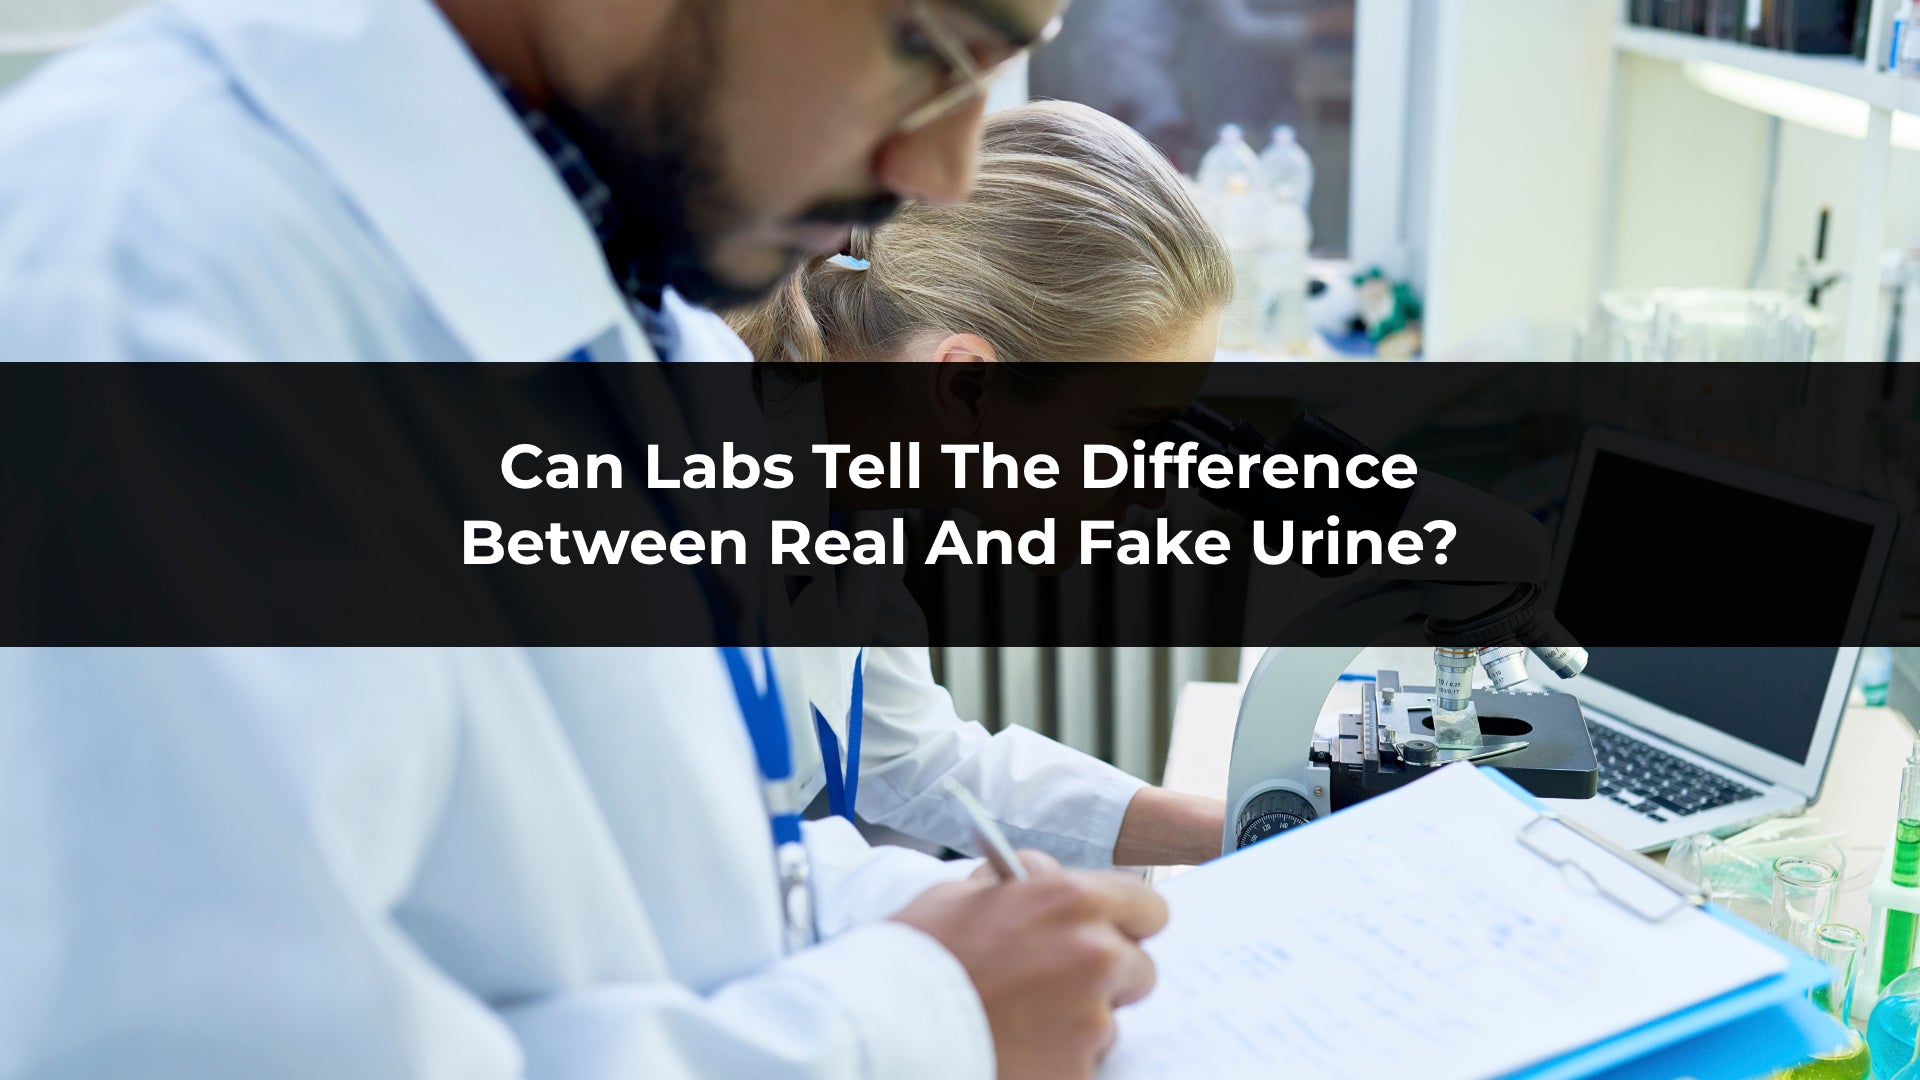 Can Labs Tell the Difference Between Real and Synthetic Urine